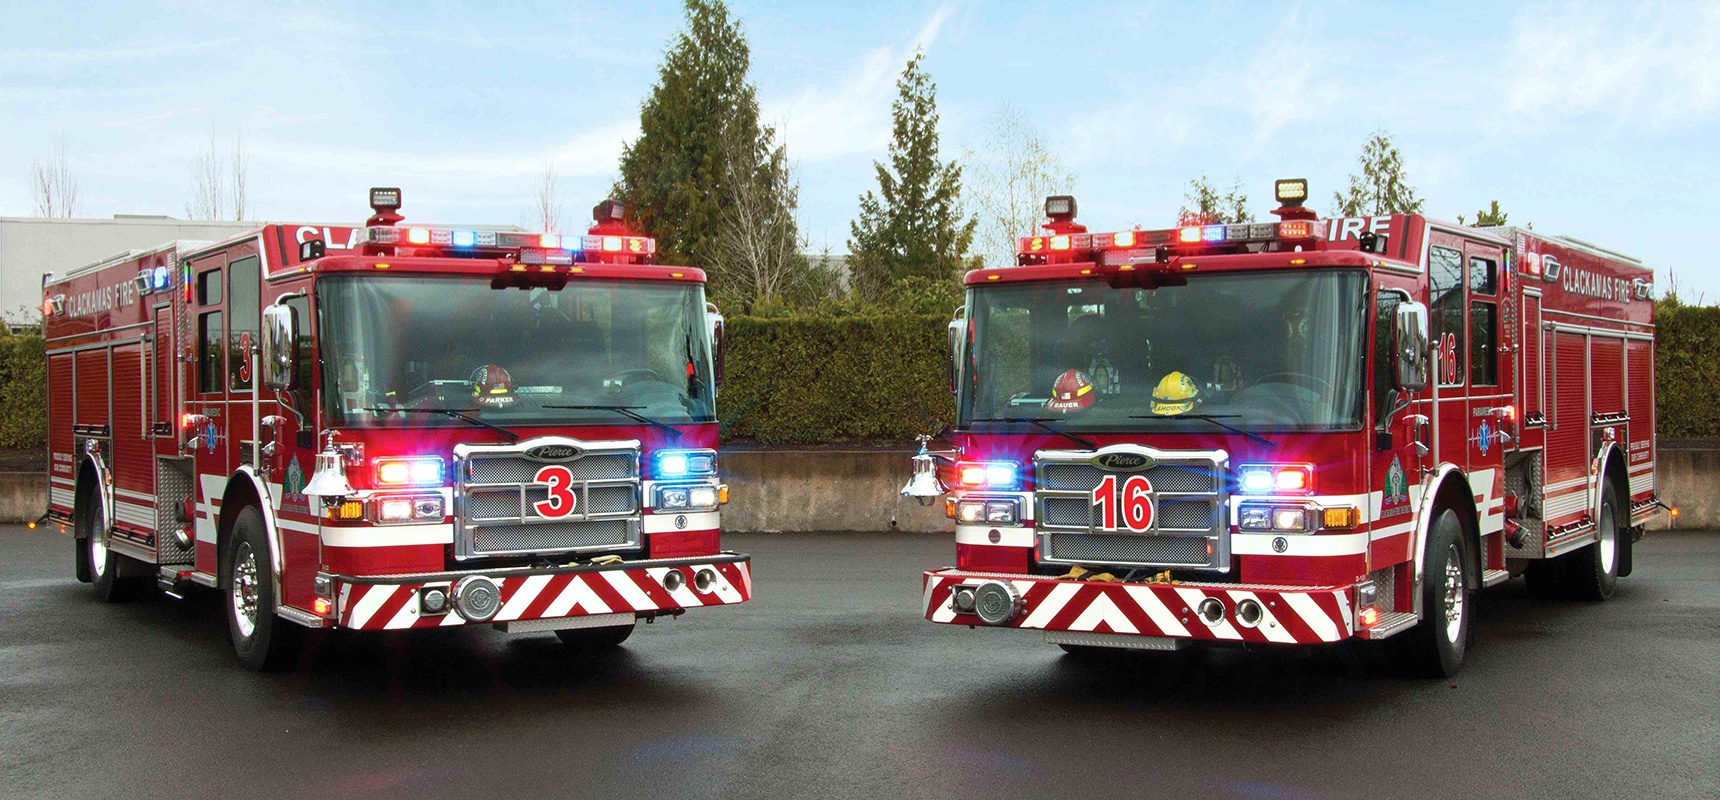 Pierce-Announces-Order-for-15-Fire-Apparatus-from-Oregons-Clackamas-Fire-District-No1_Header.jpg